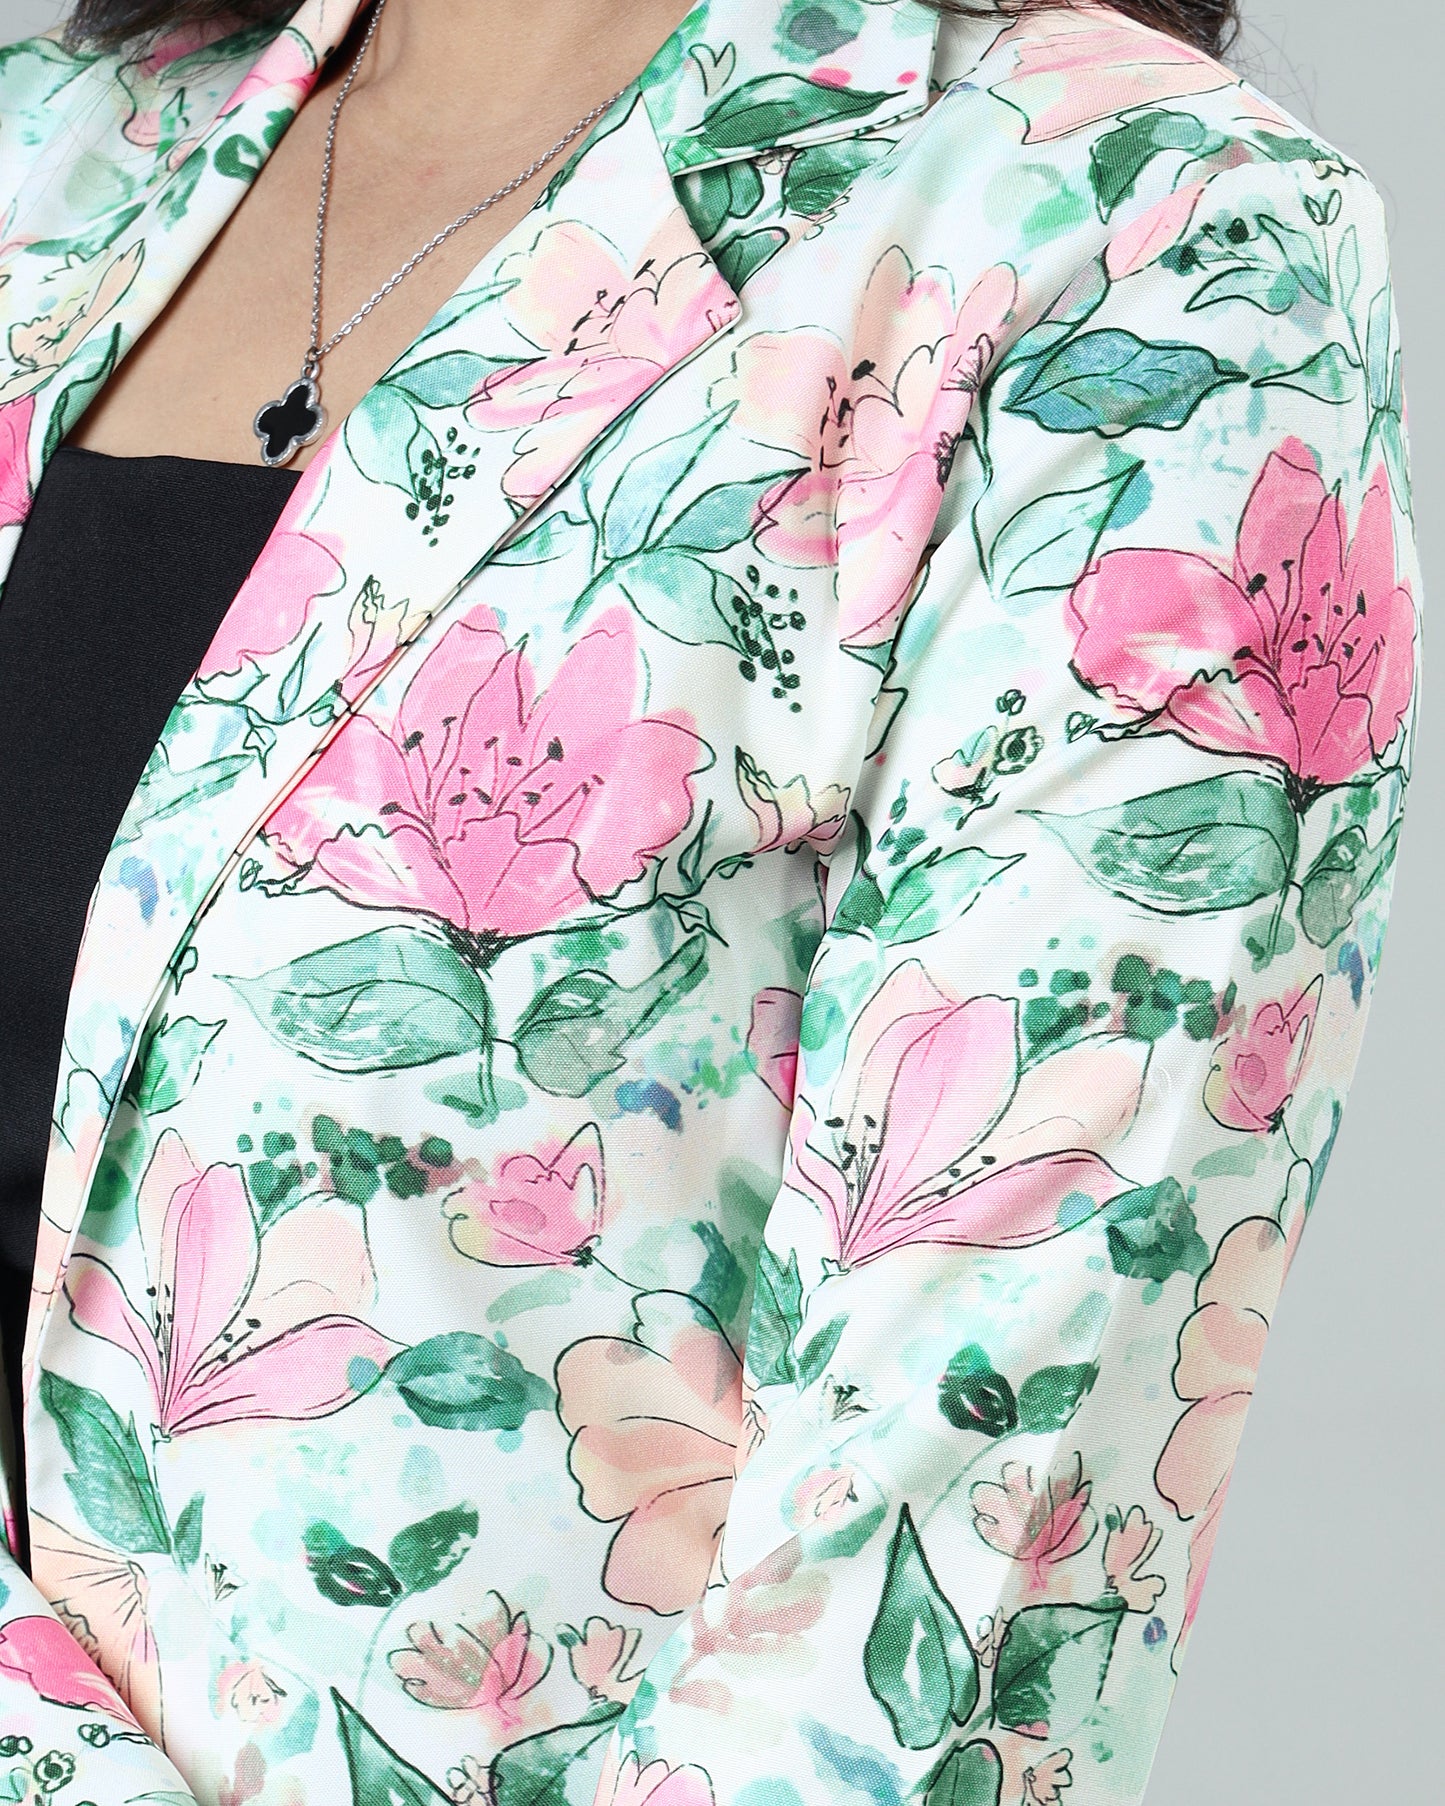 Hang Out in Style: The Floral Jacket For Women